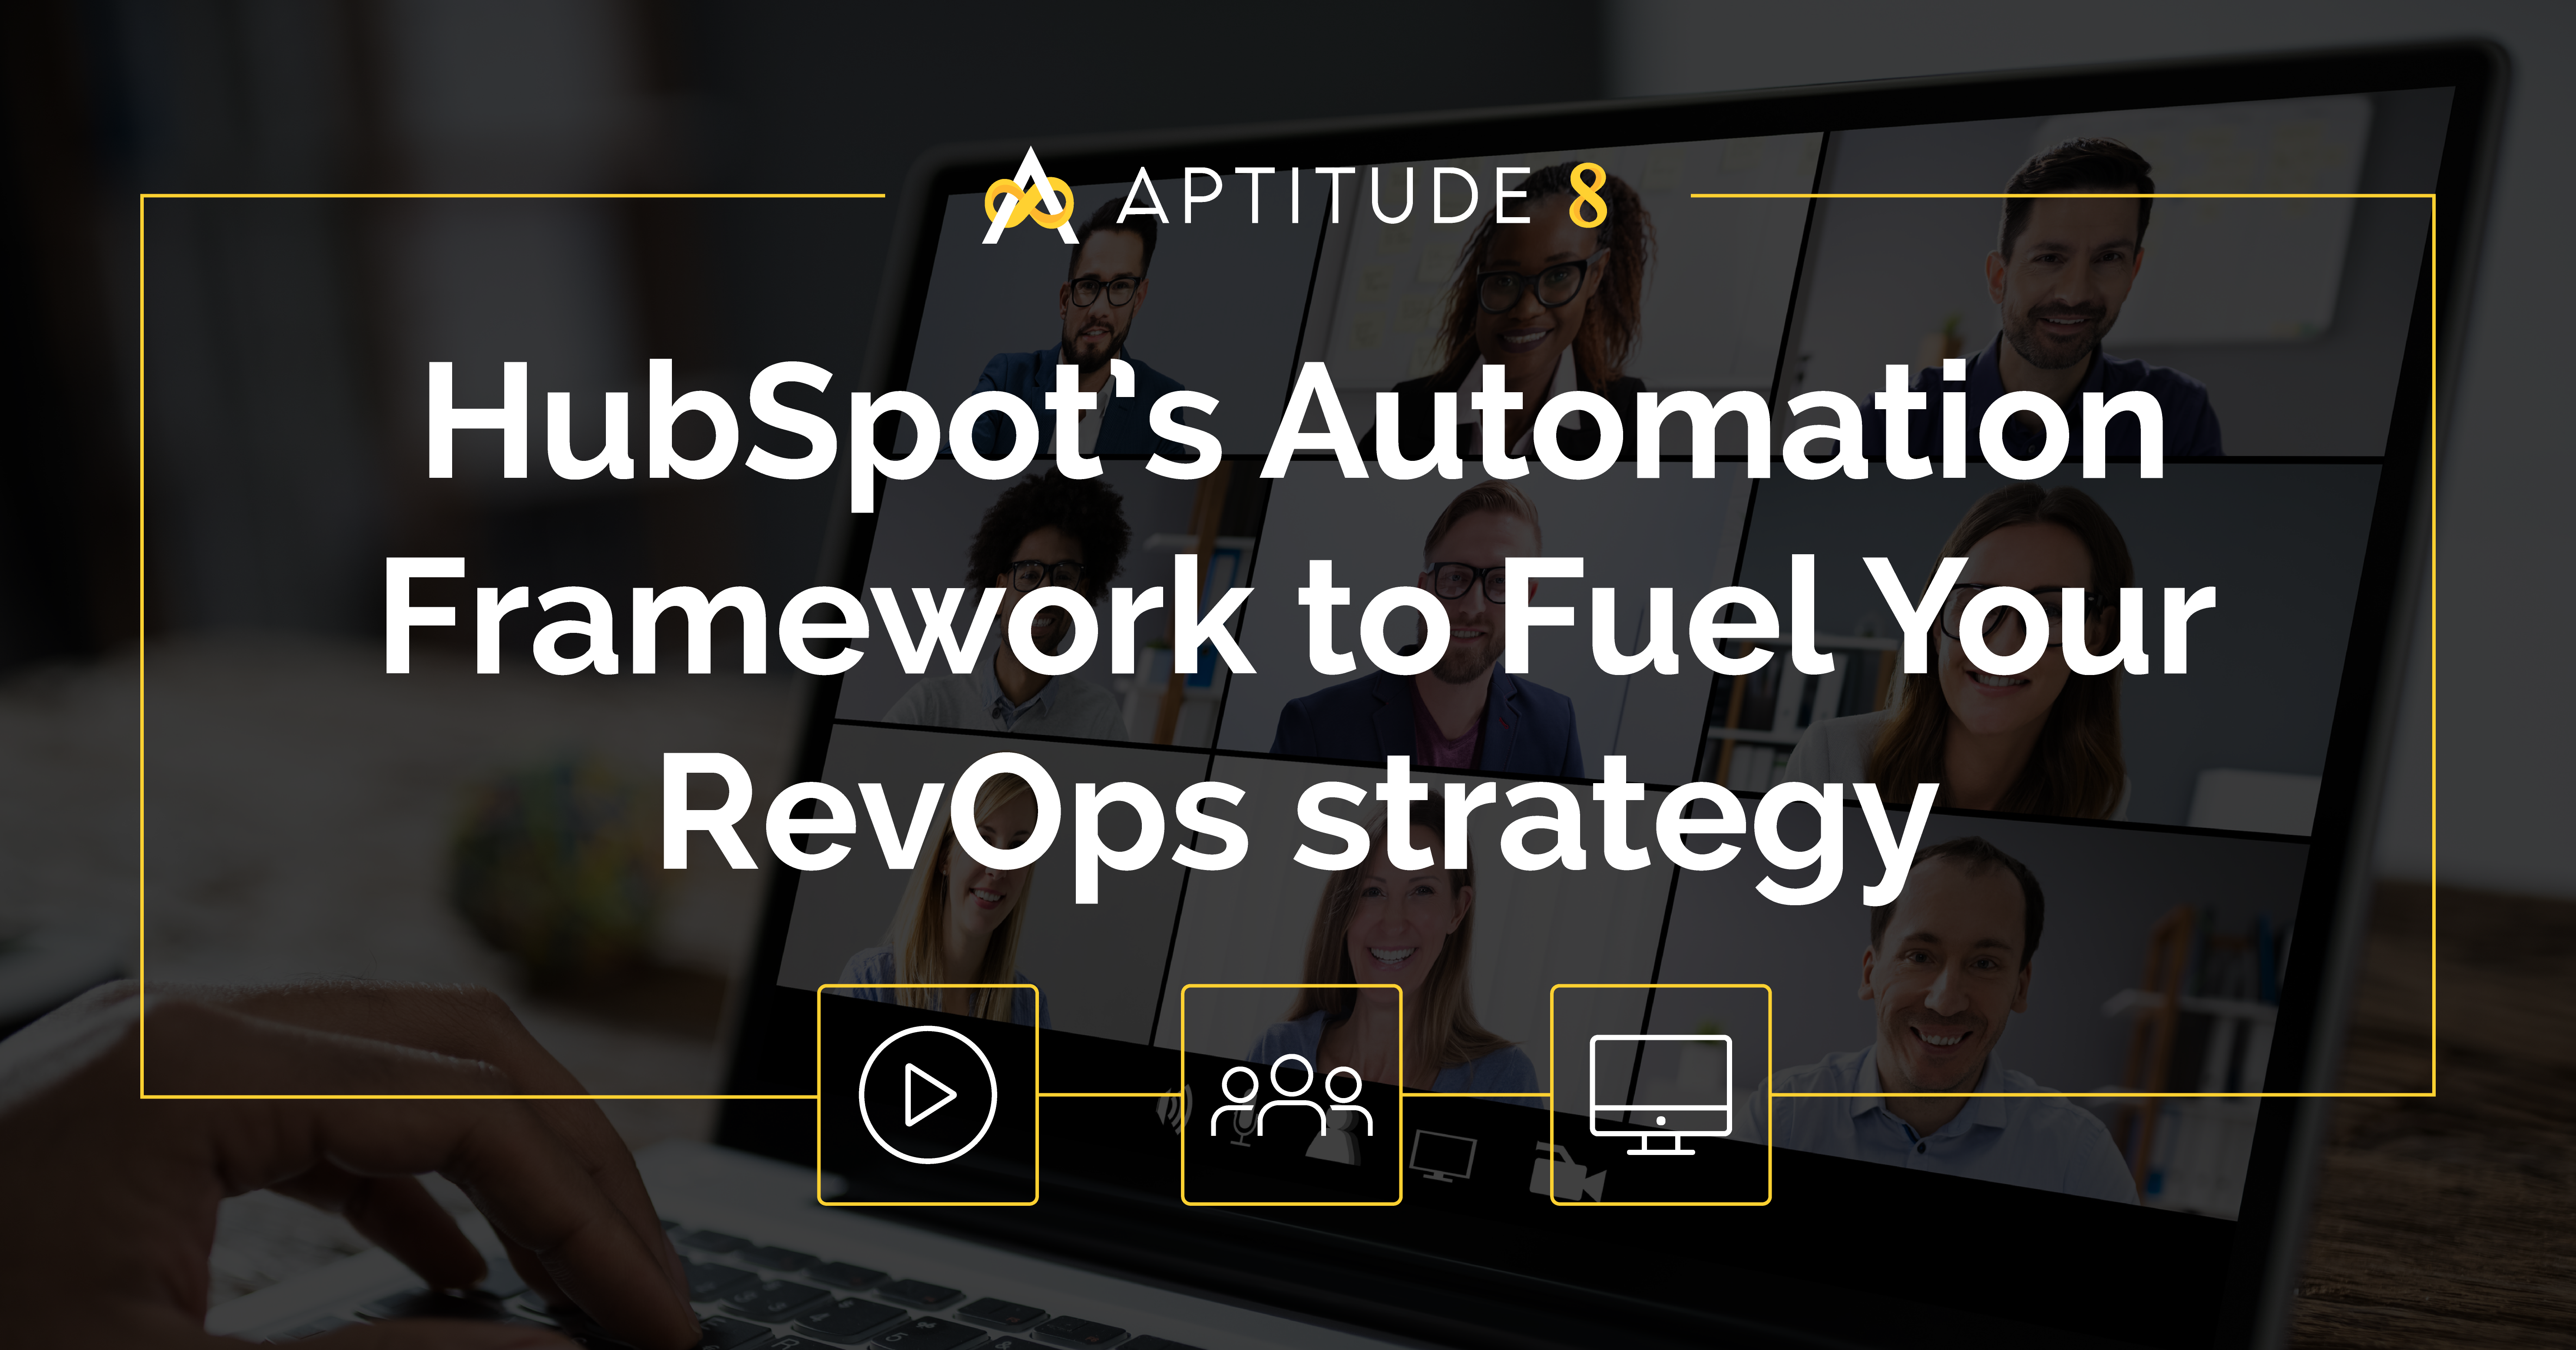 HubSpot’s Automation Framework to Fuel Your RevOps strategy